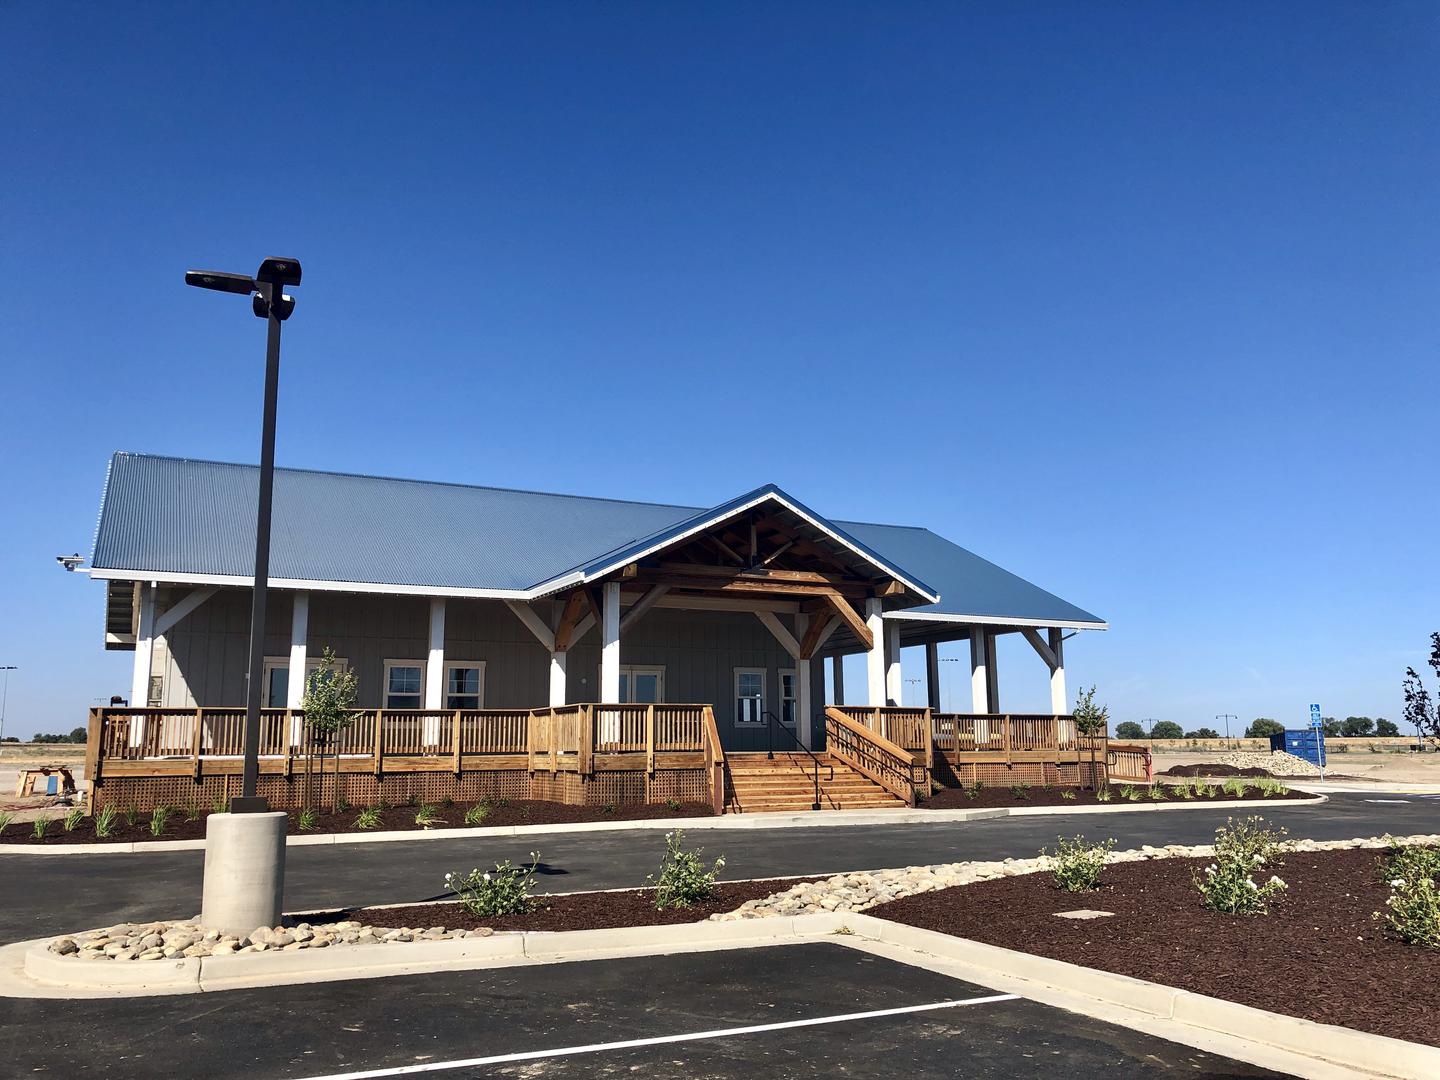 Welcome Center Opening on July 27th